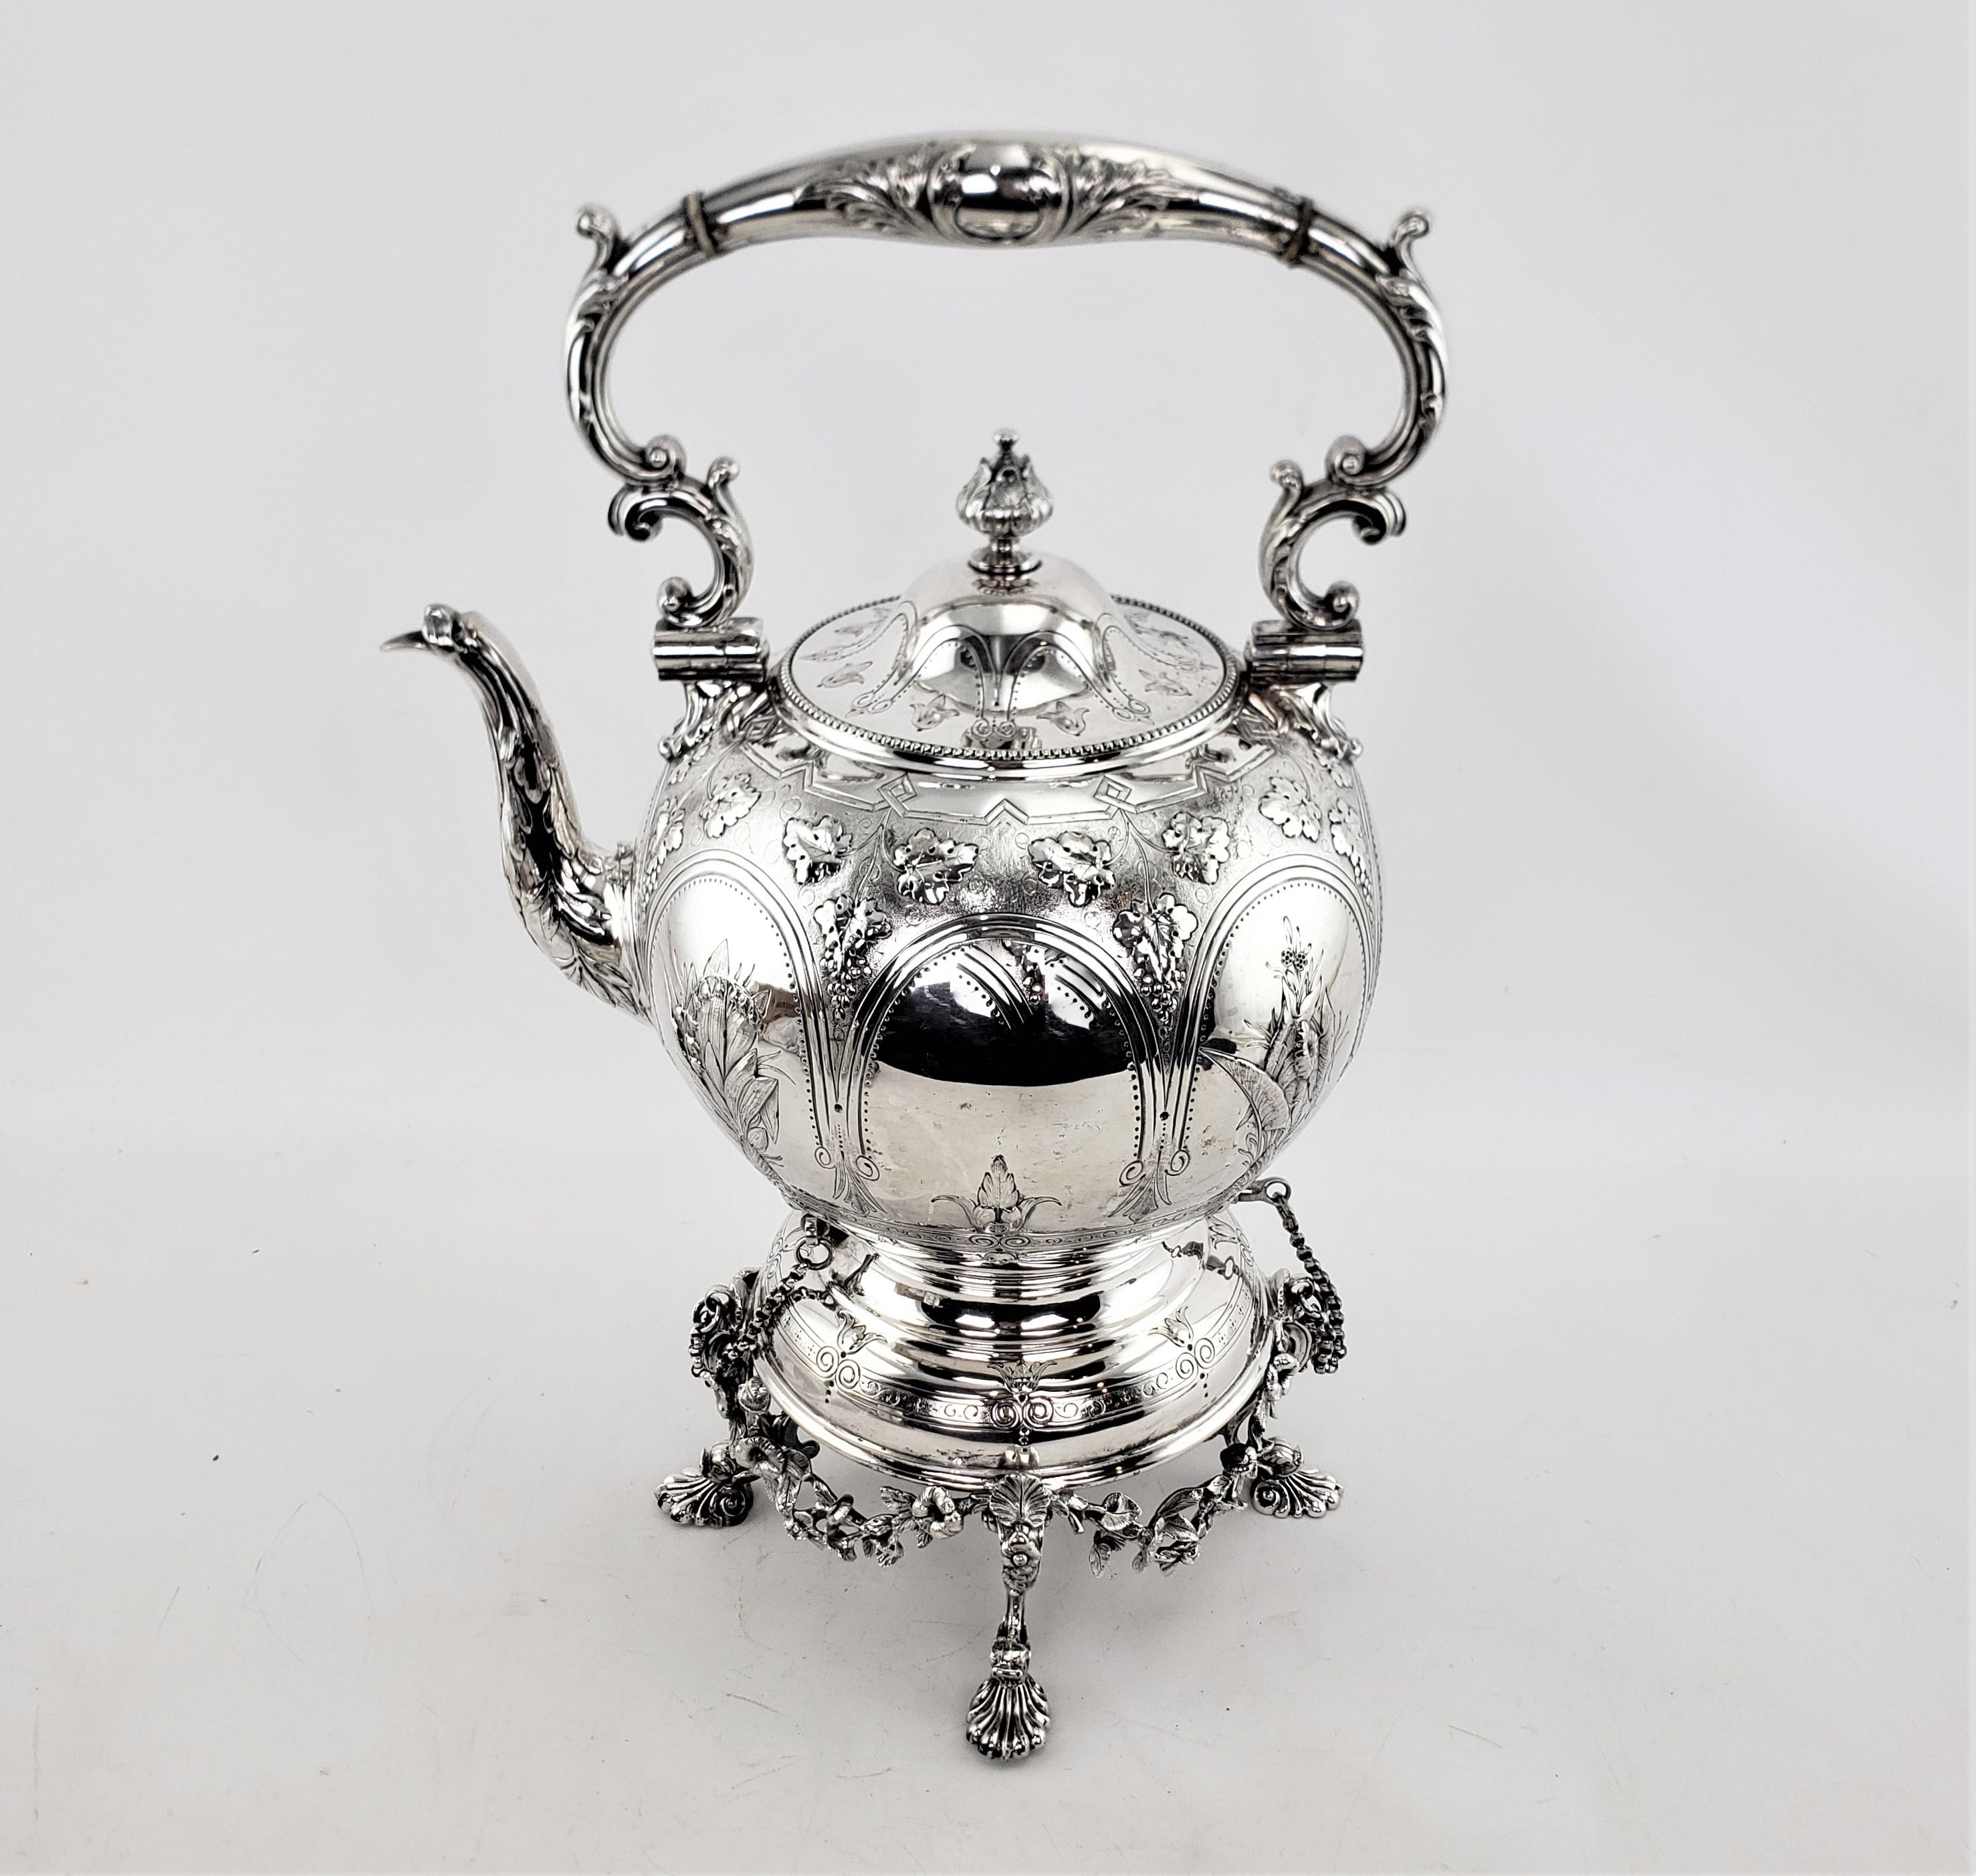 This antique spirit kettle was made by the well known Elkington & Co. of England in approximately 1880 and done in the period Victorian style. The kettle and stand are done in silver plate with a very sturdy construction and the kettle has a hinged